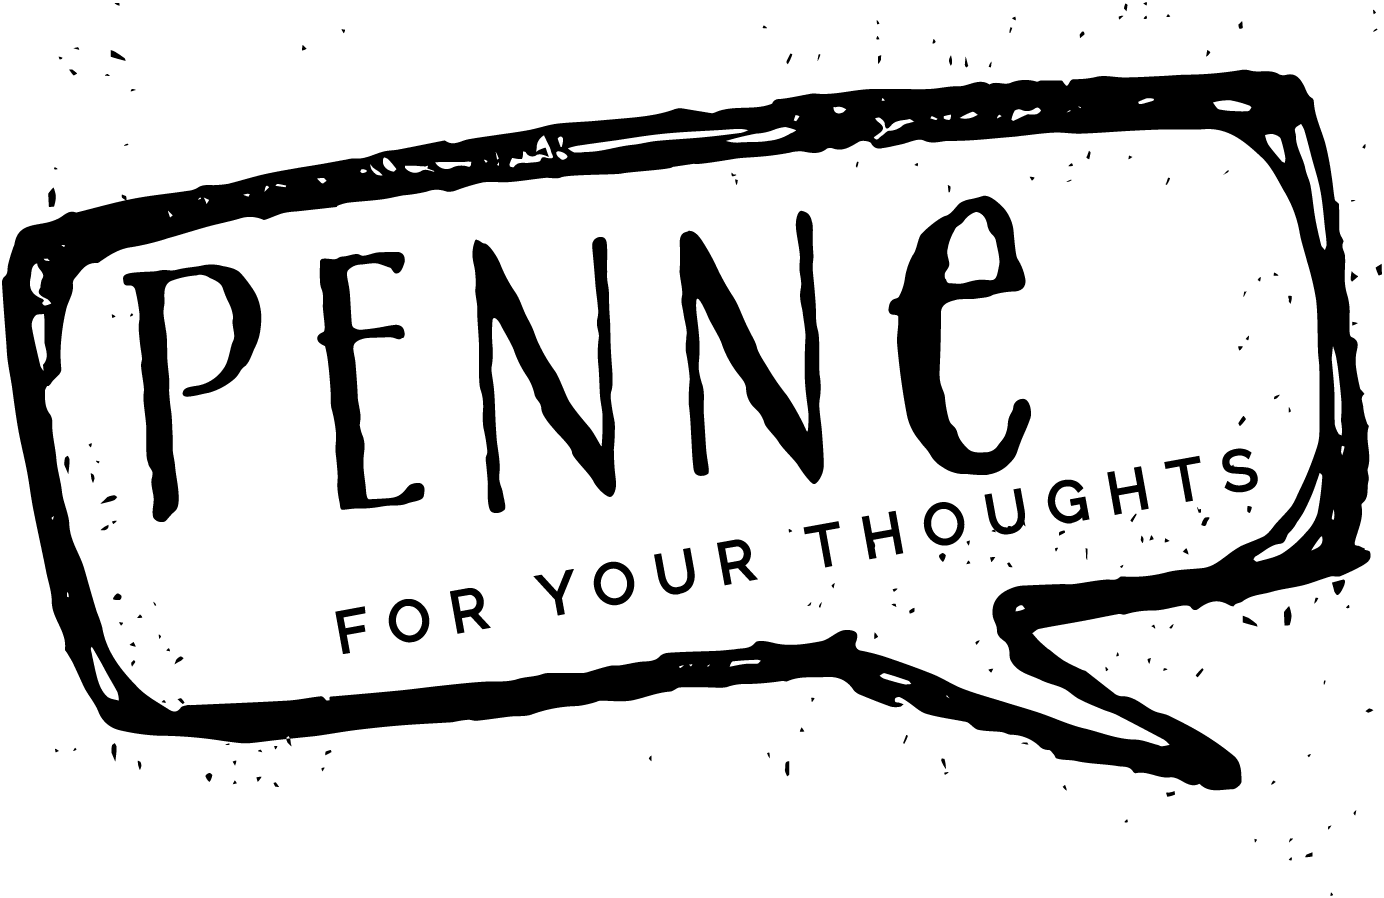 Penne For Your Thoughts logo scroll